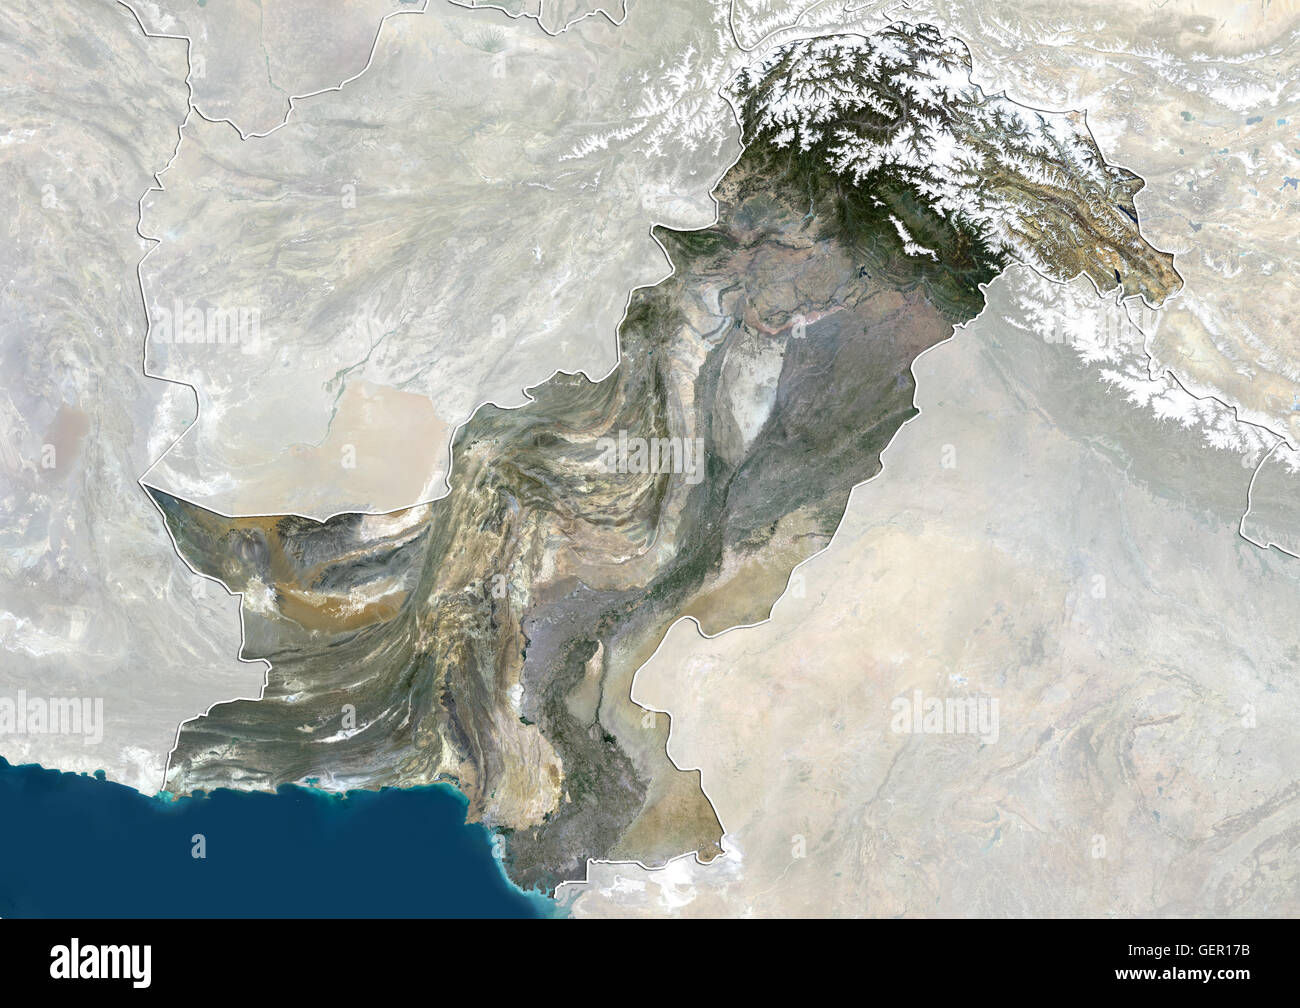 Satellite view of Pakistan (with country boundaries and mask) showing disputed boundaries with India. This image was compiled from data acquired by Landsat 8 satellite in 2014. Stock Photo